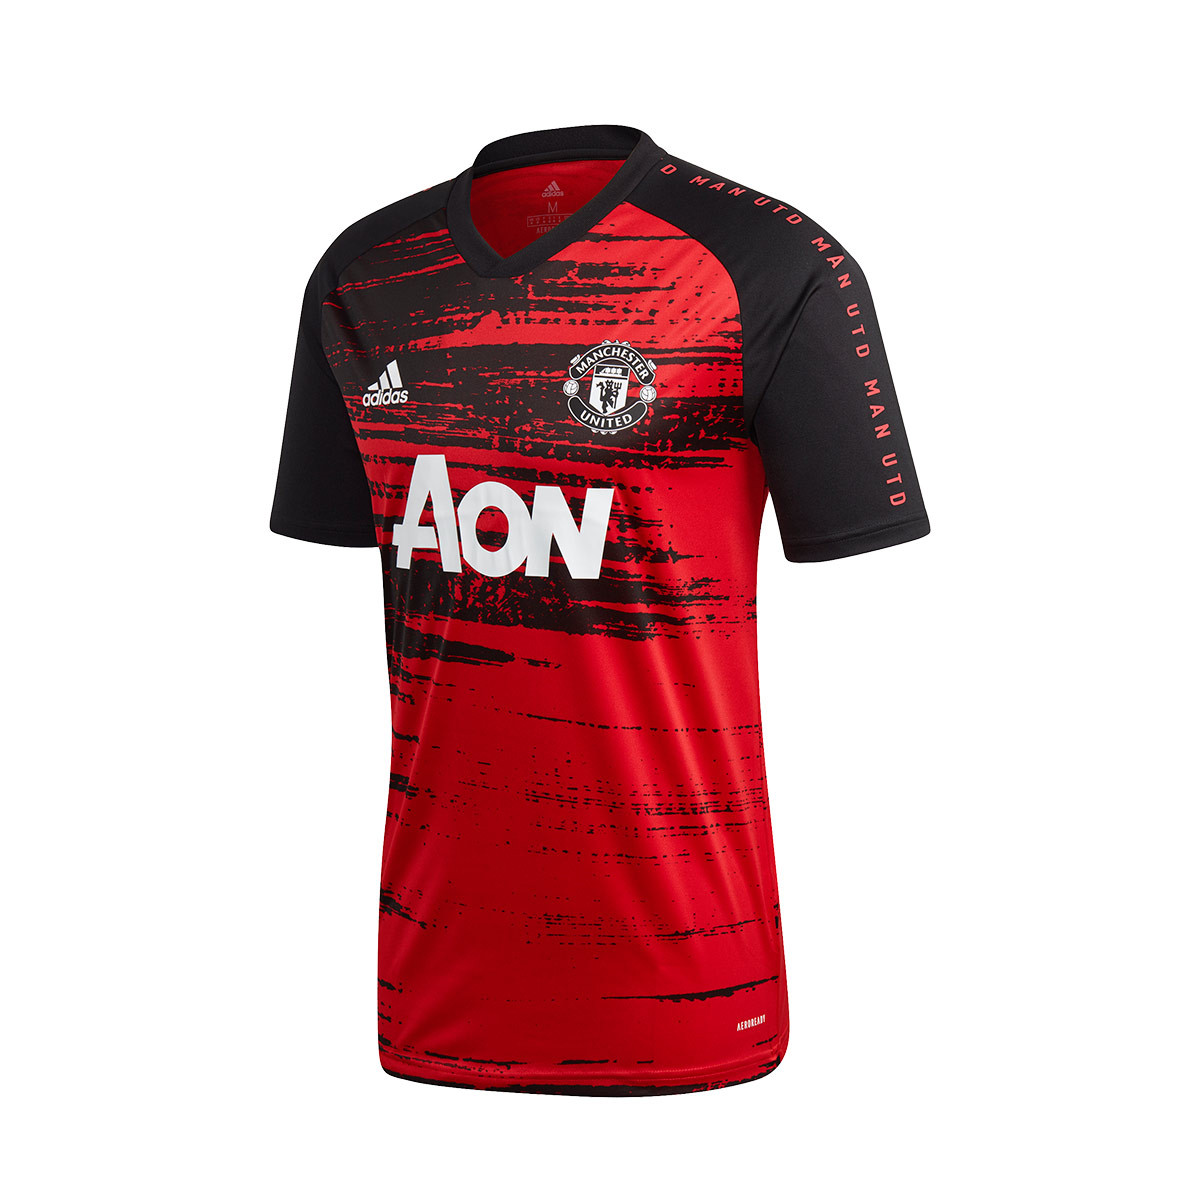 manchester united red jersey